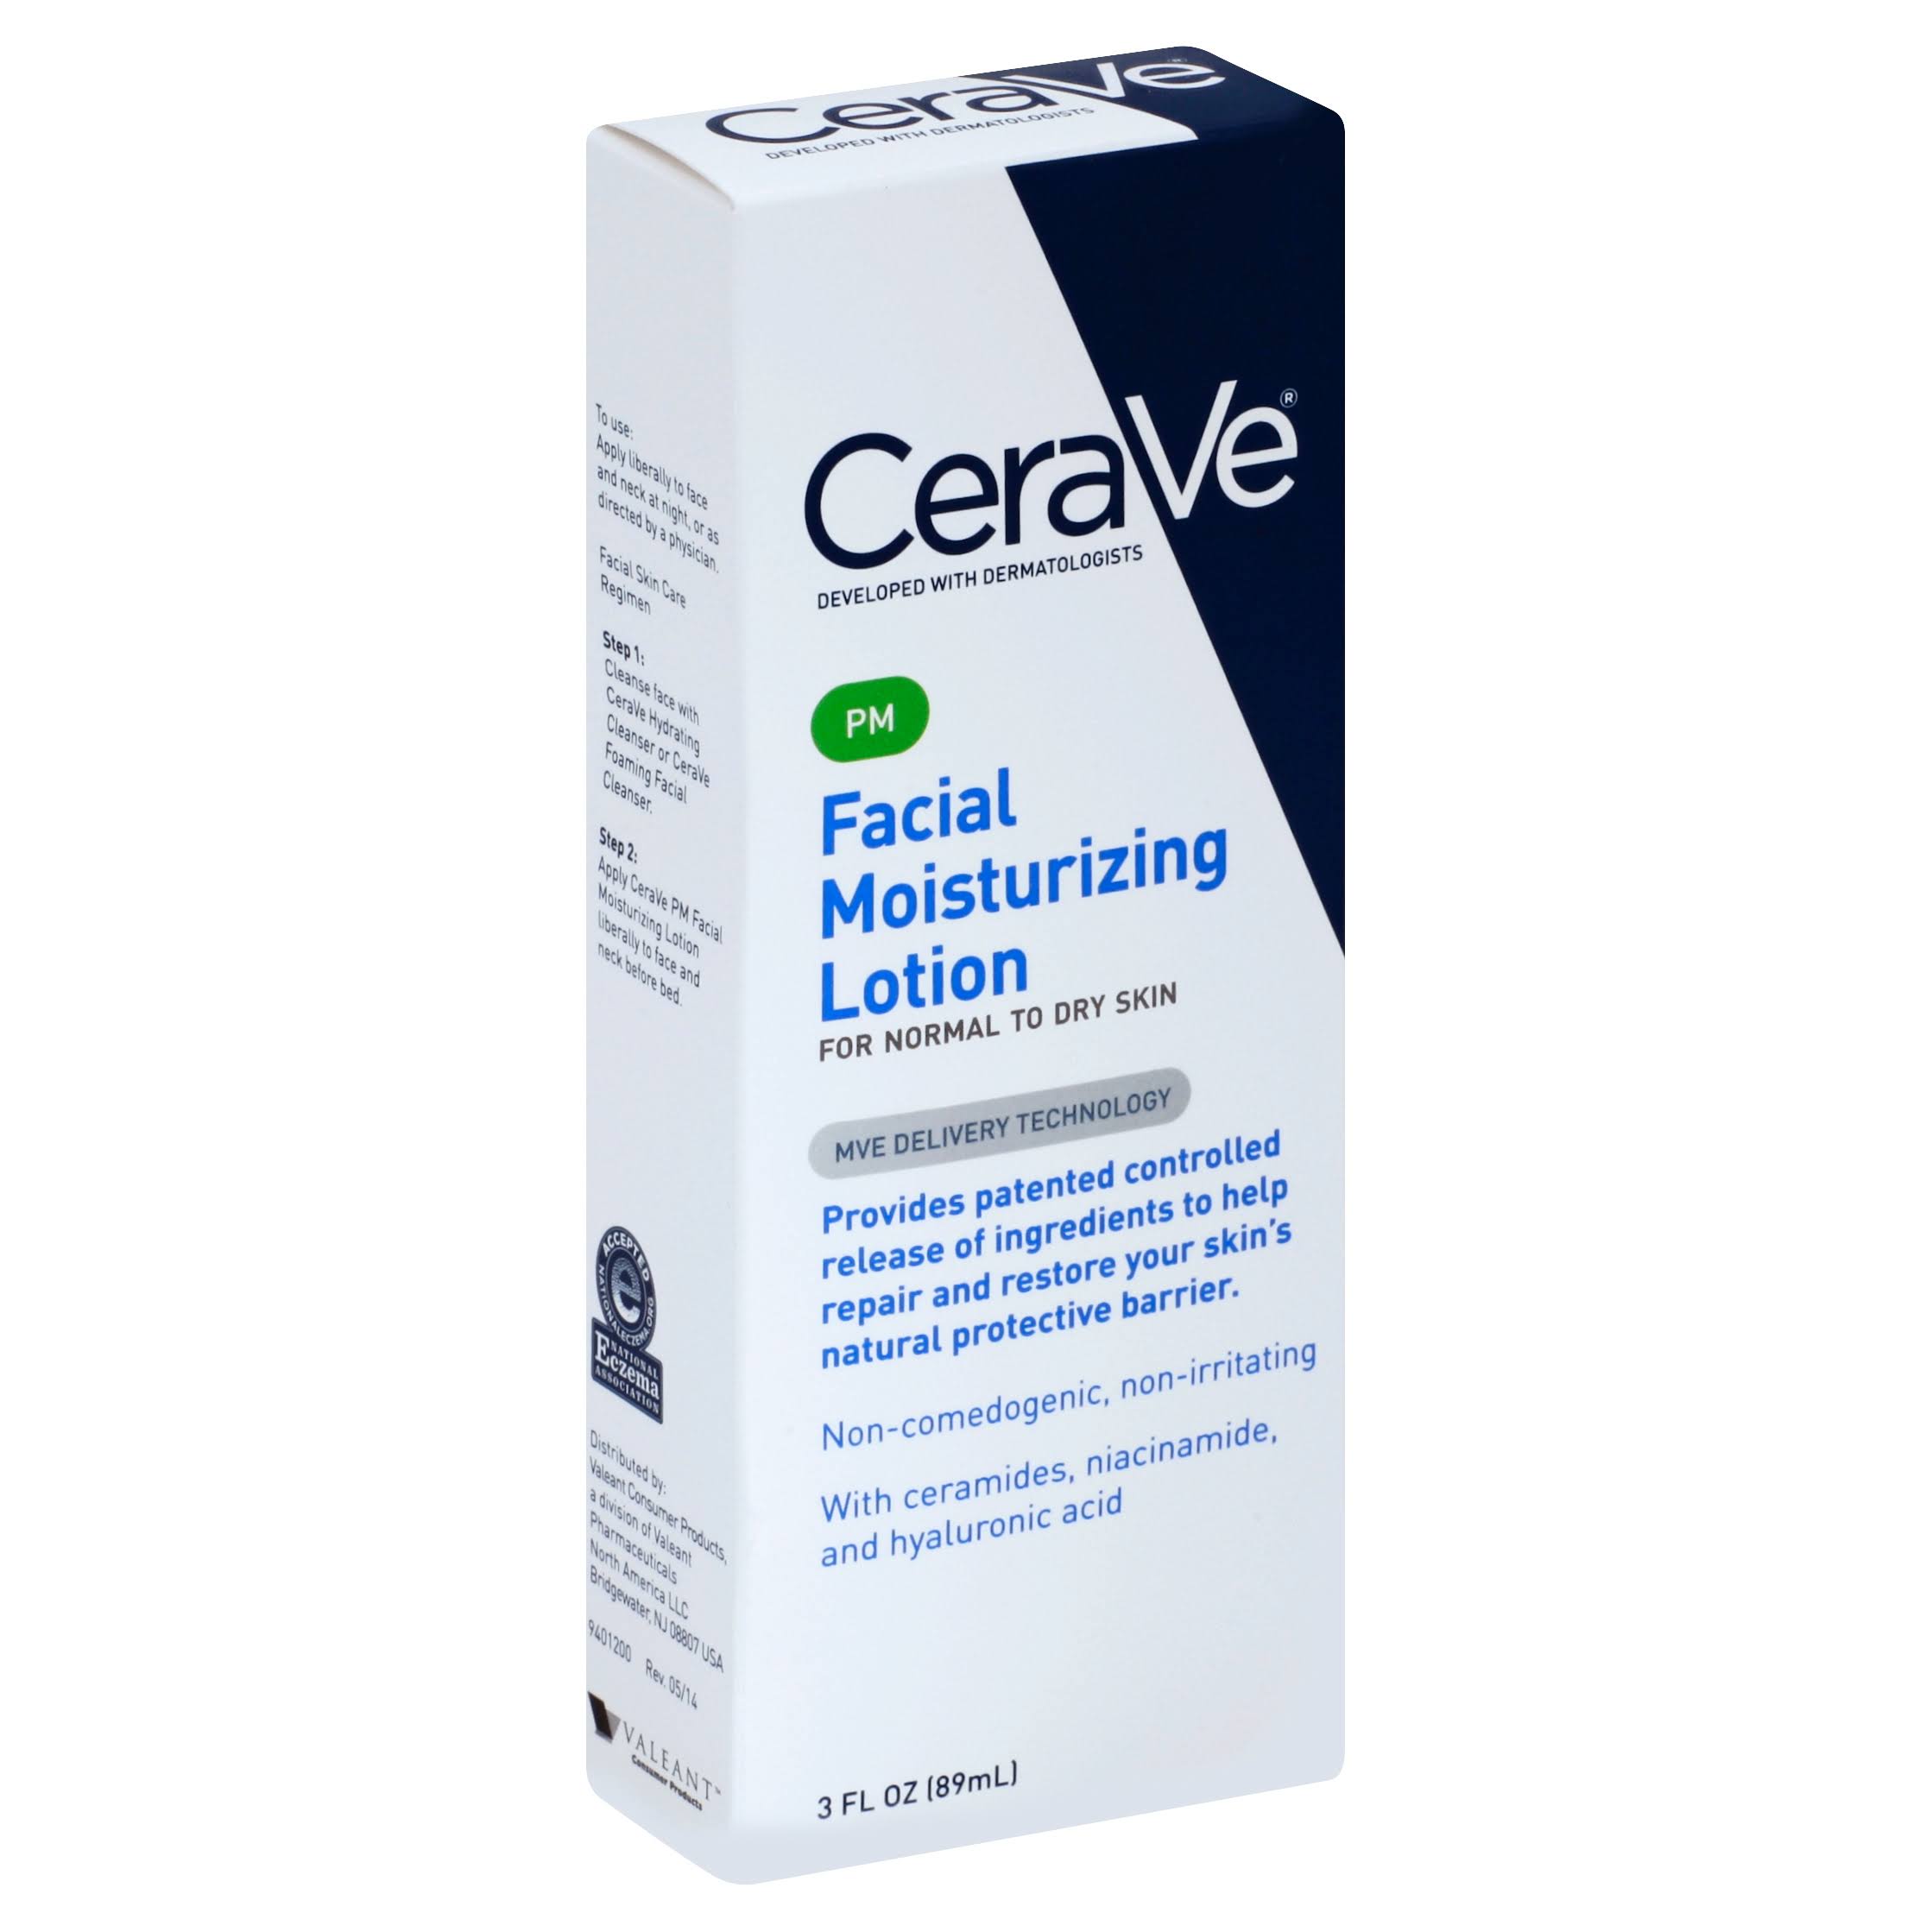 CeraVe PM Facial Moisturizing Lotion - Normal to Dry Skin, 3oz